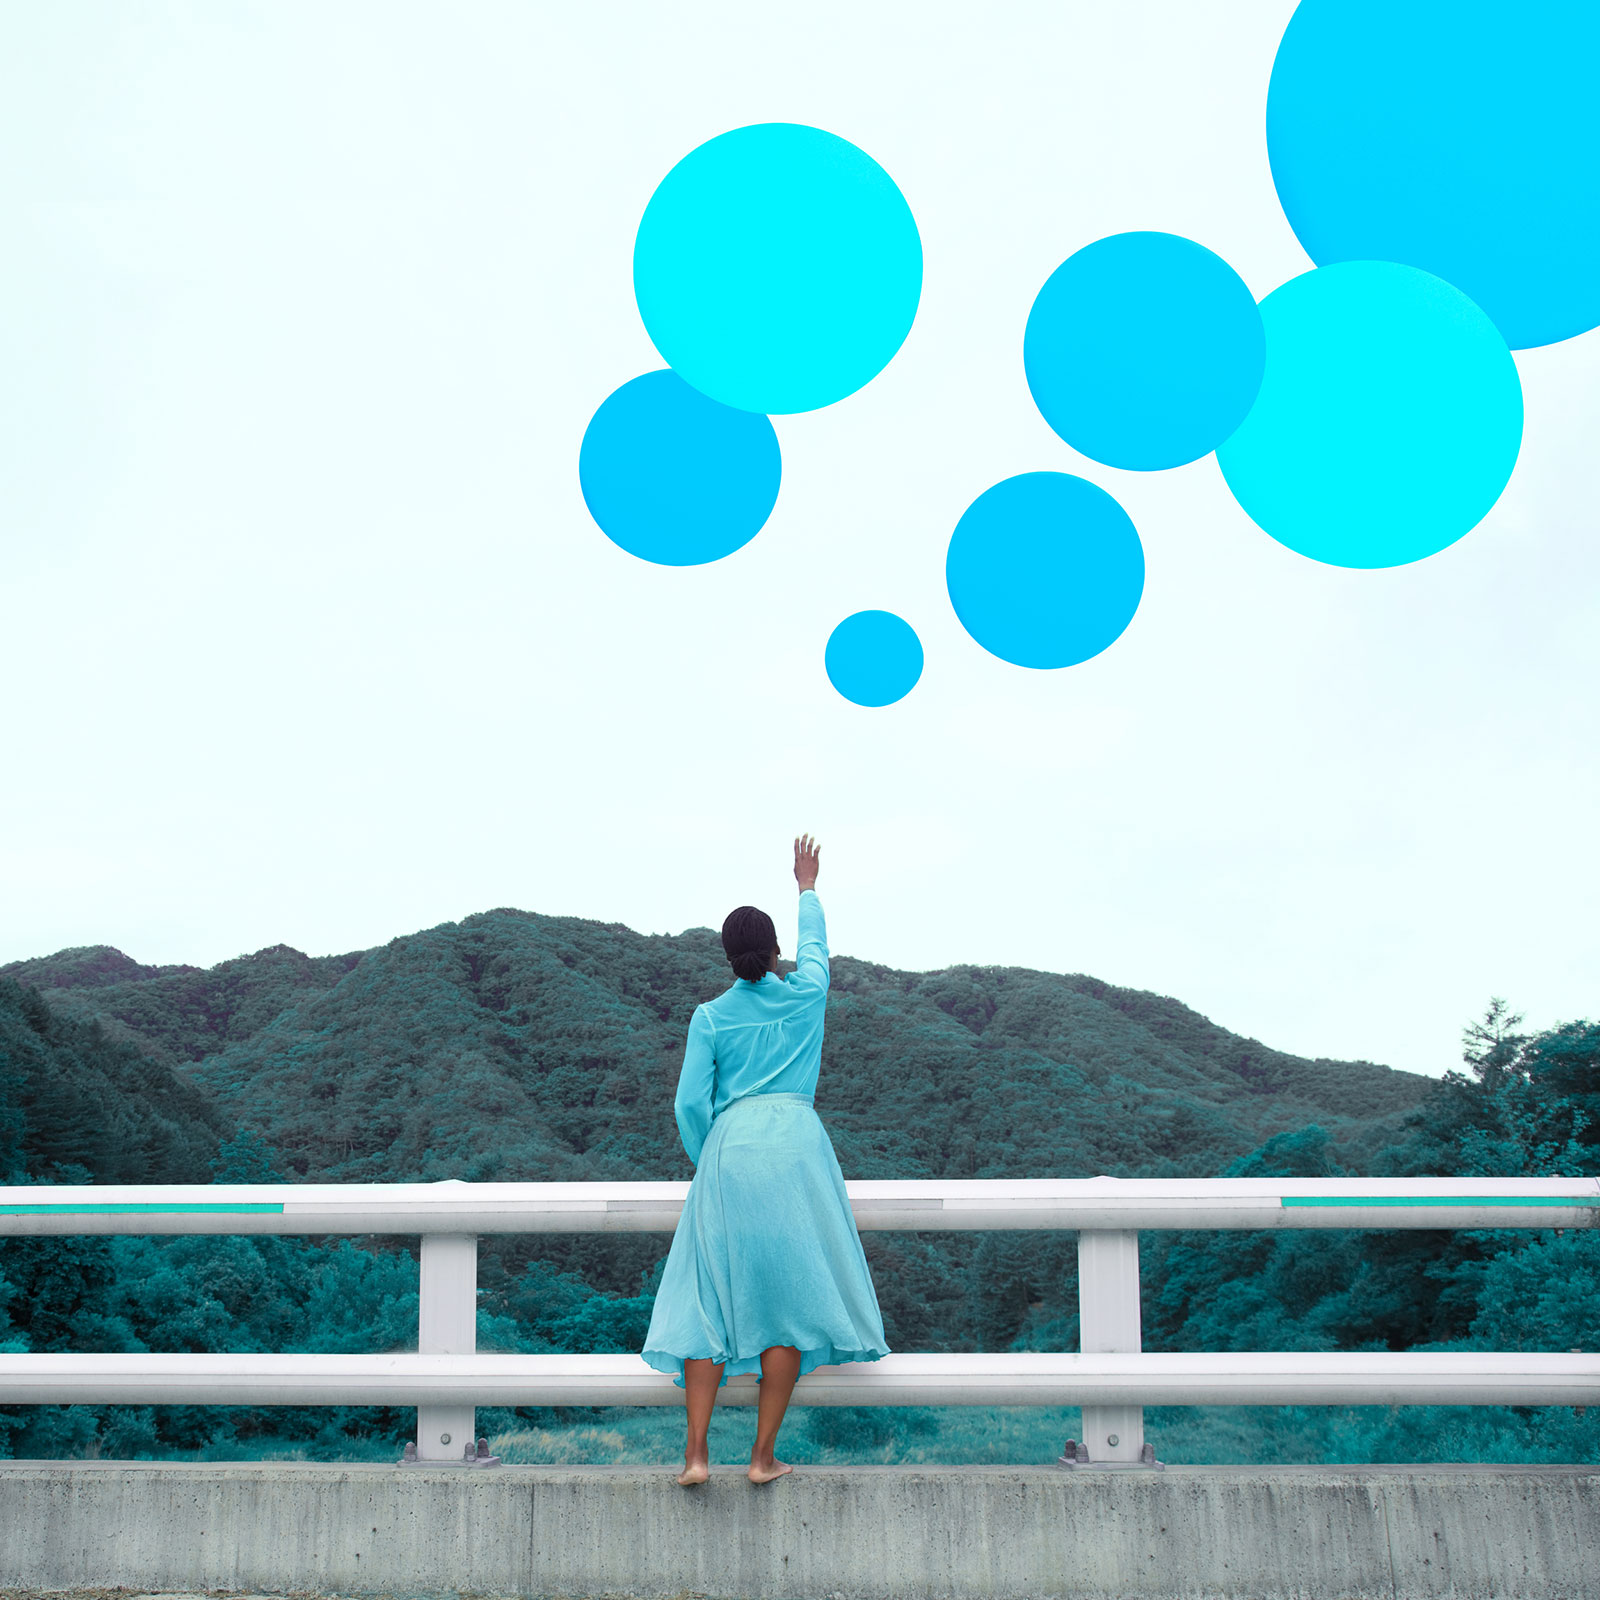 A woman reaching for the sky towards bright blue balloons